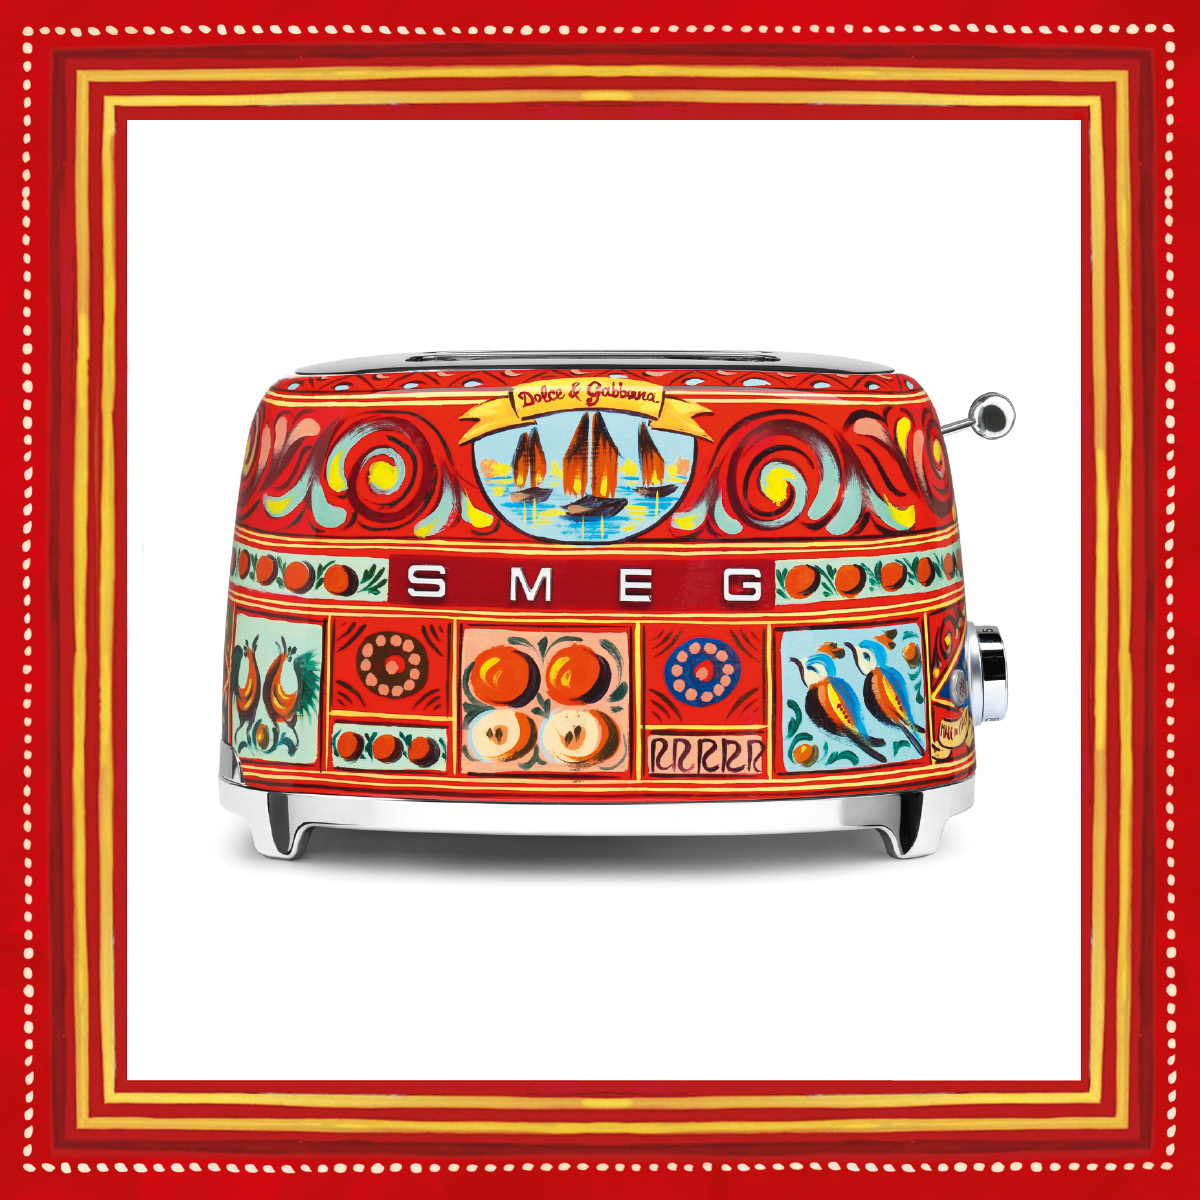 Sicily is my love Smeg and Dolce&Gabbana - Sicily is my love